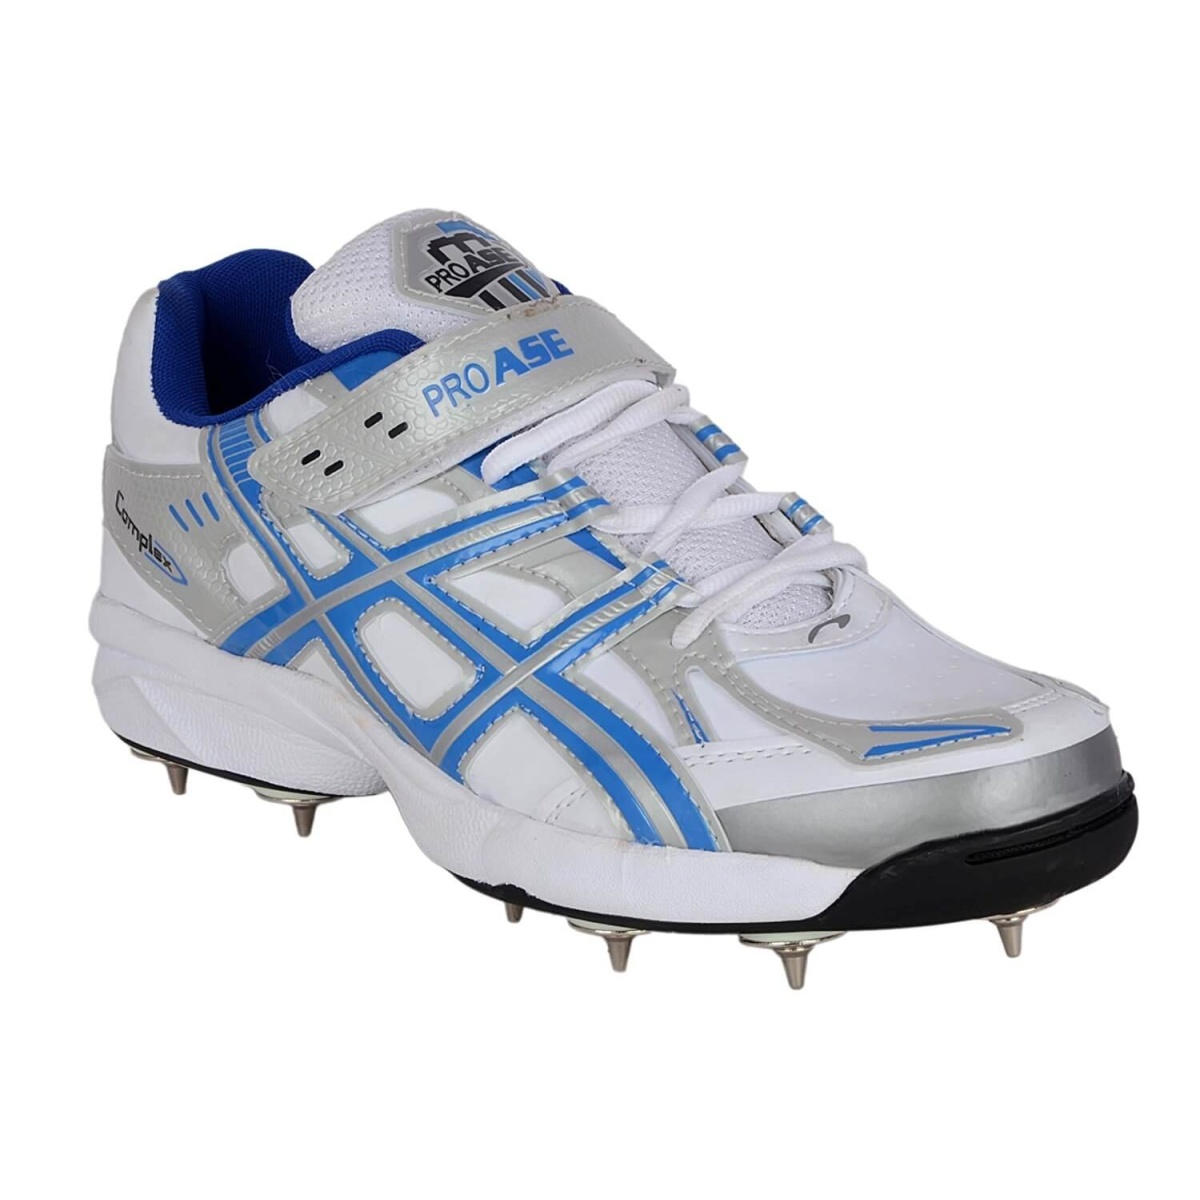 ProASE Complex Cricket Spikes Shoes - White/Blue